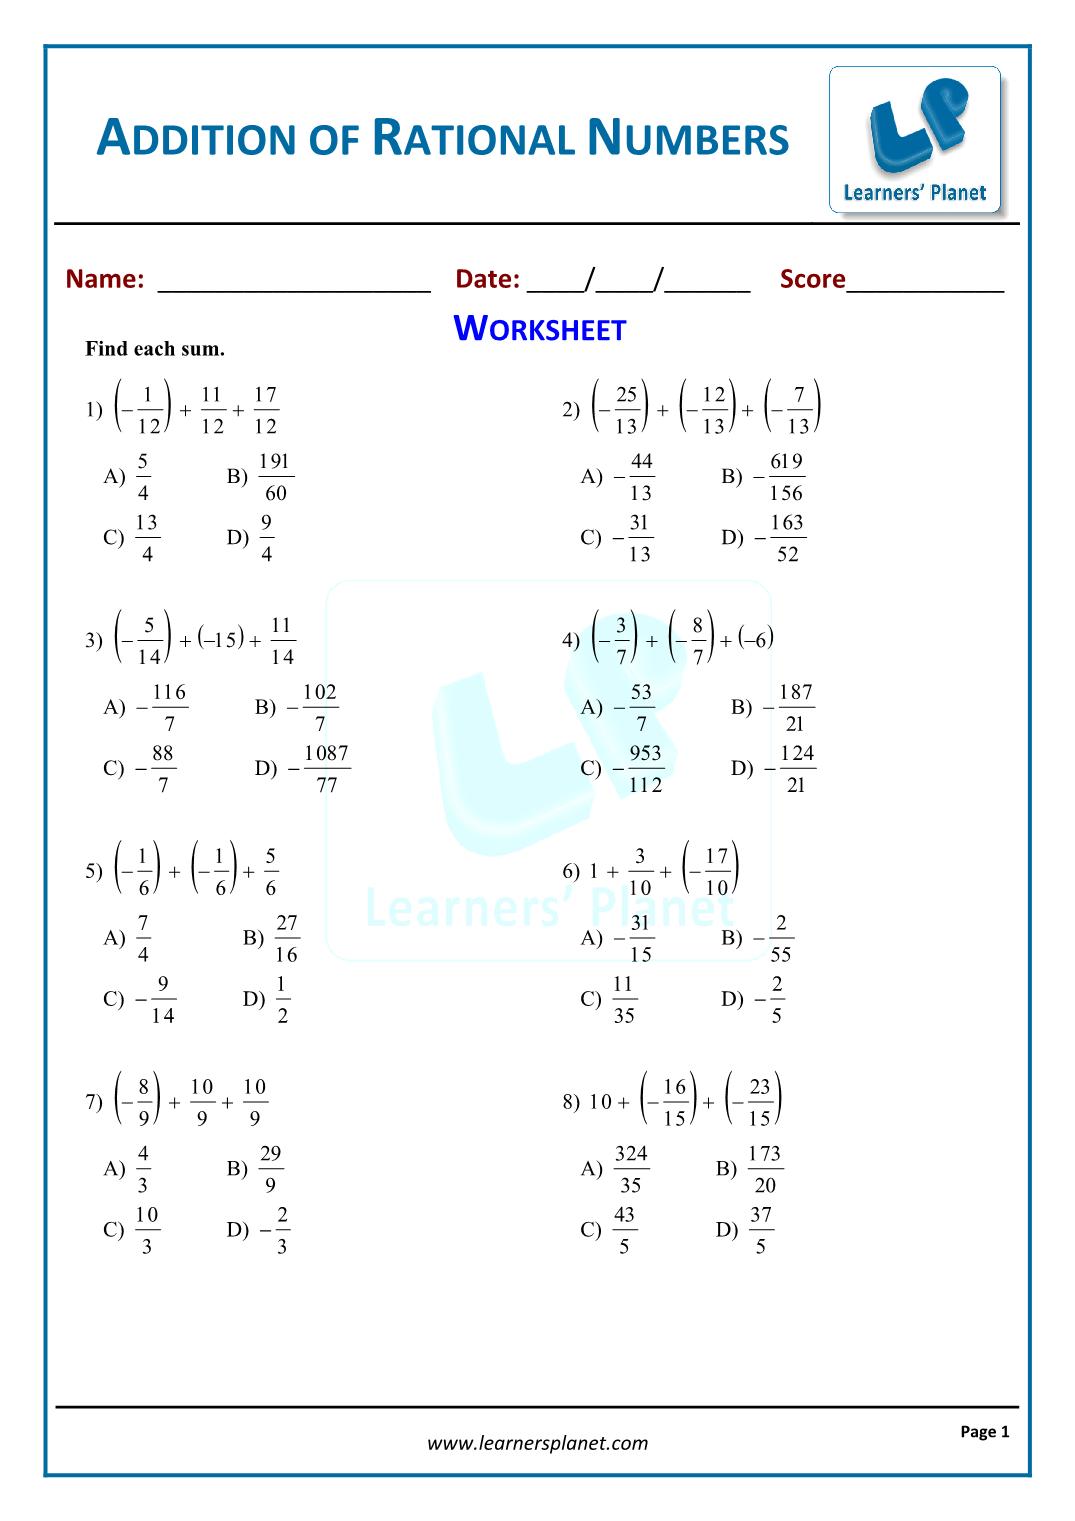 Addition of Rational Numbers Workbook 1